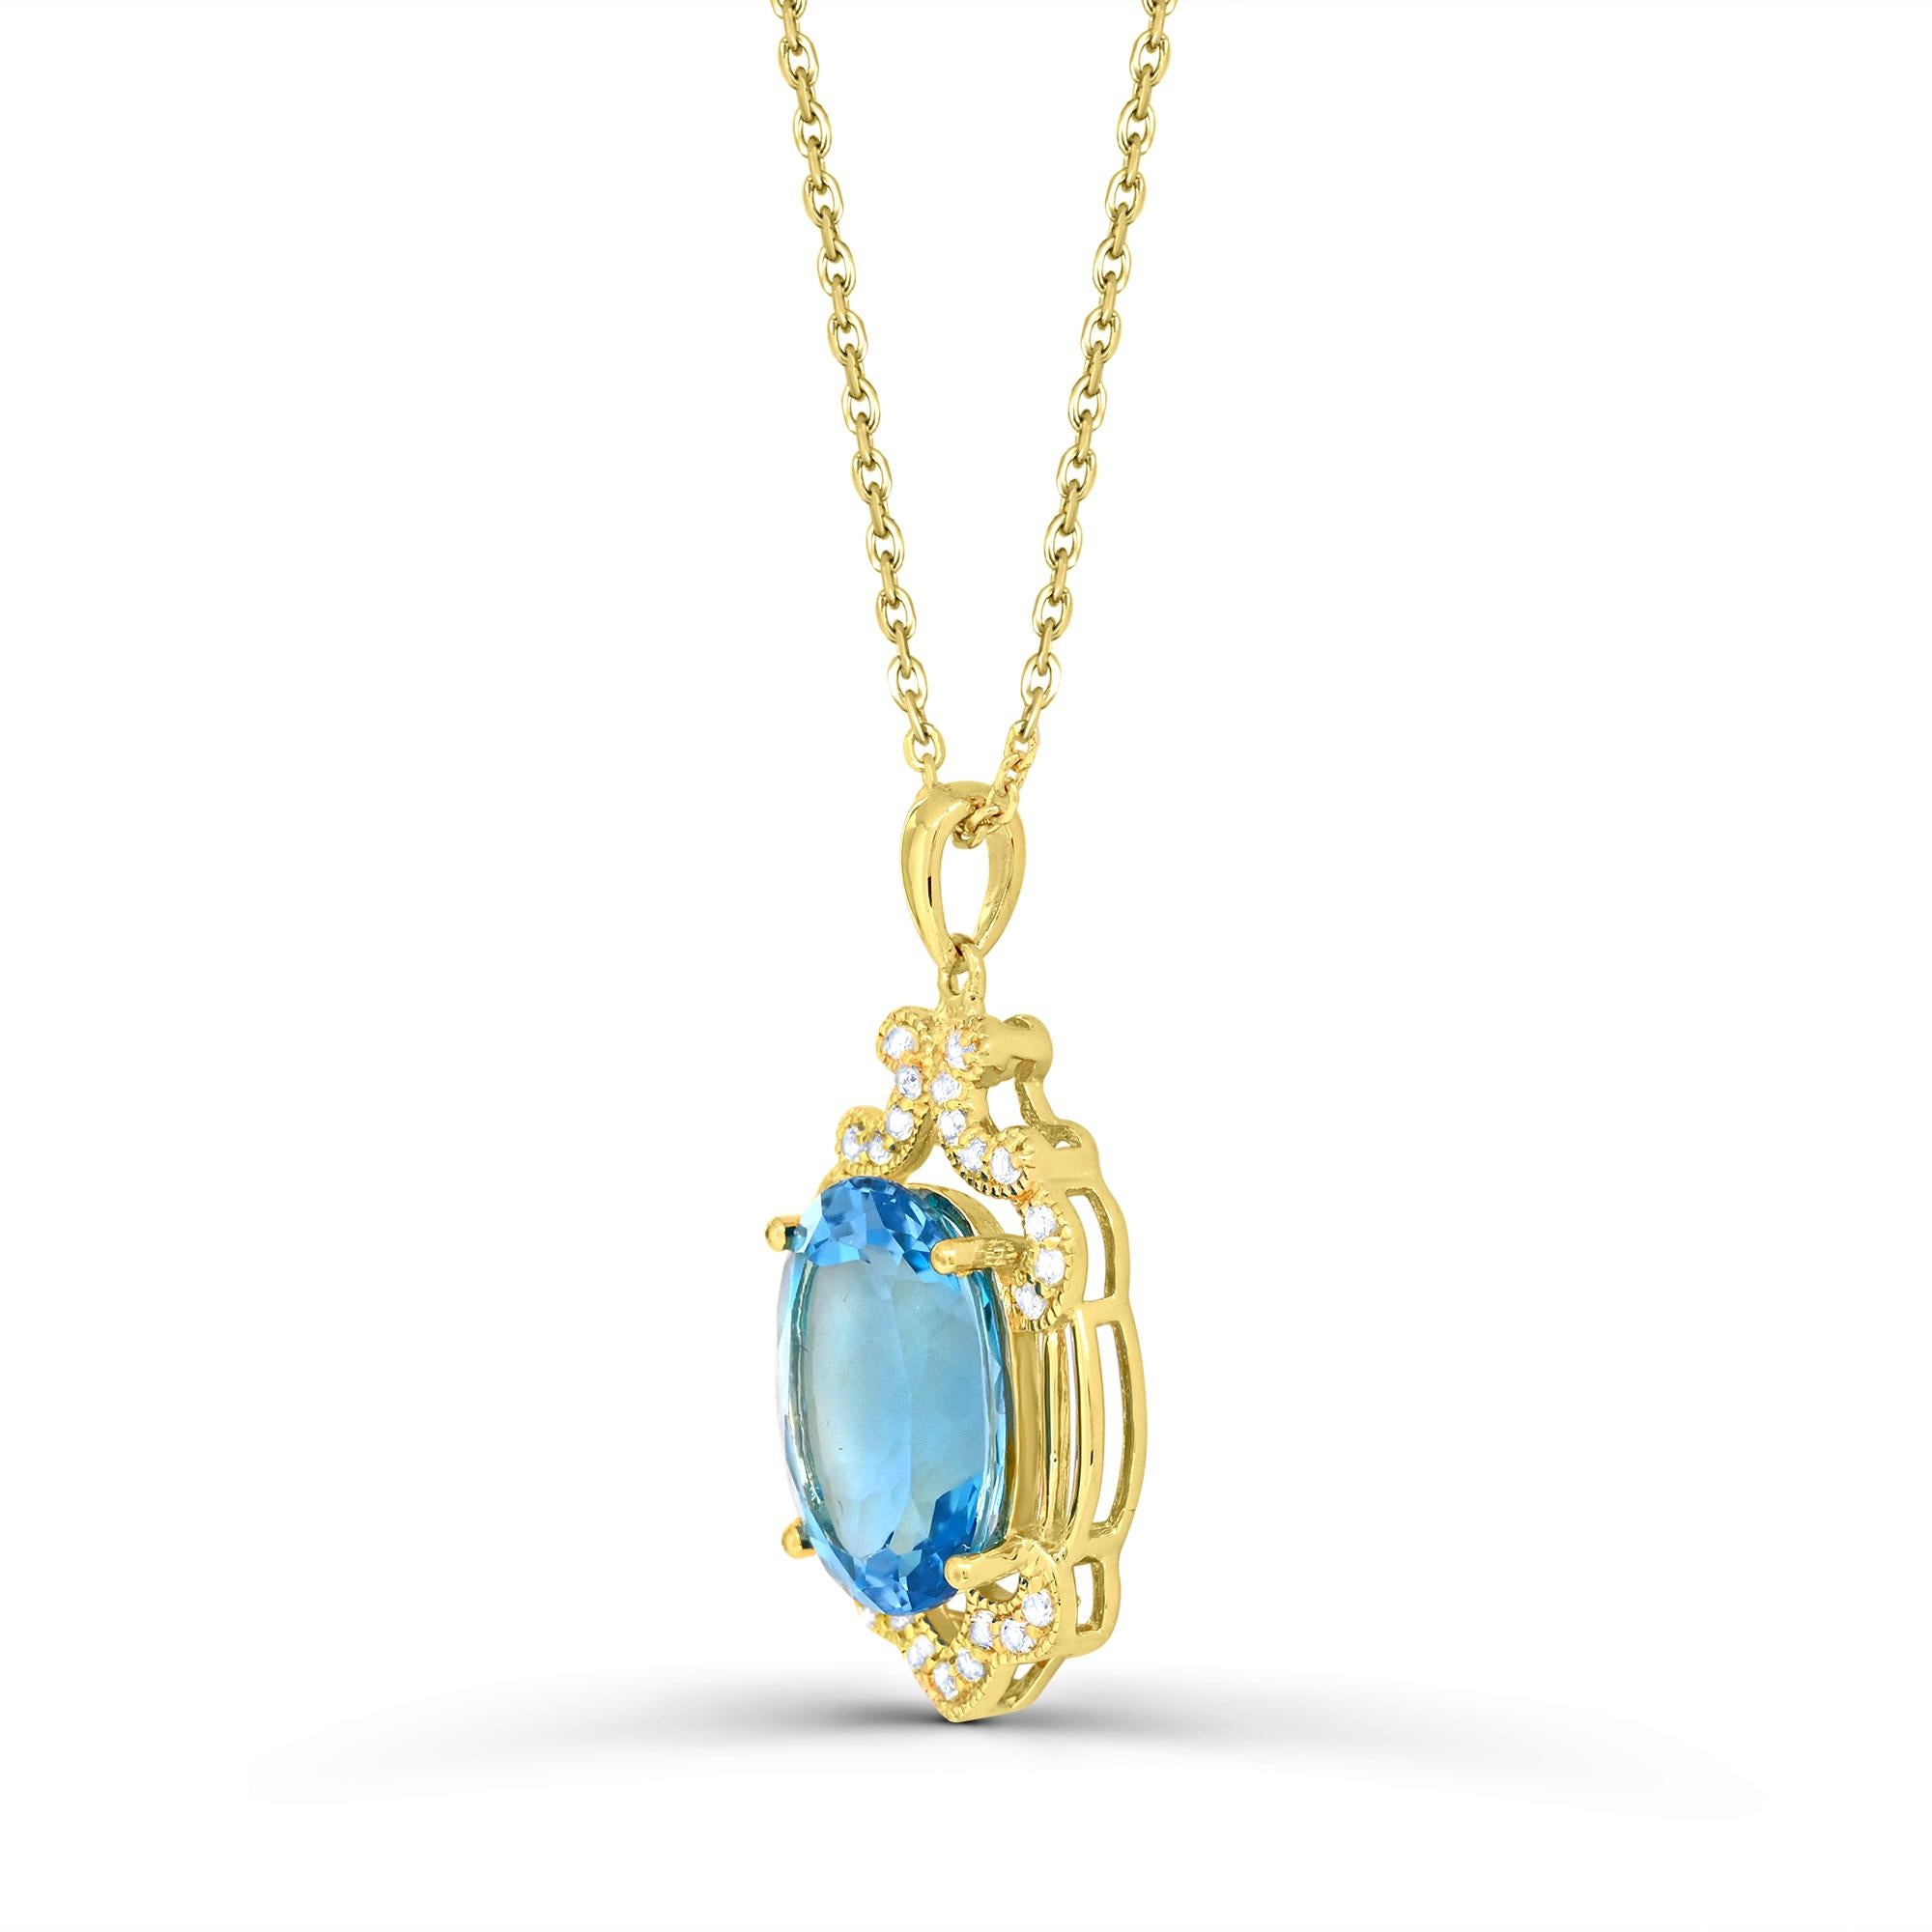 Indulge in the elegance of our Swiss Blue and White Topaz Pendant Necklace in 14K Yellow Gold over Sterling Silver. Crafted with meticulous attention to detail, this necklace boasts a stunning combination of oval Swiss blue topaz accented by